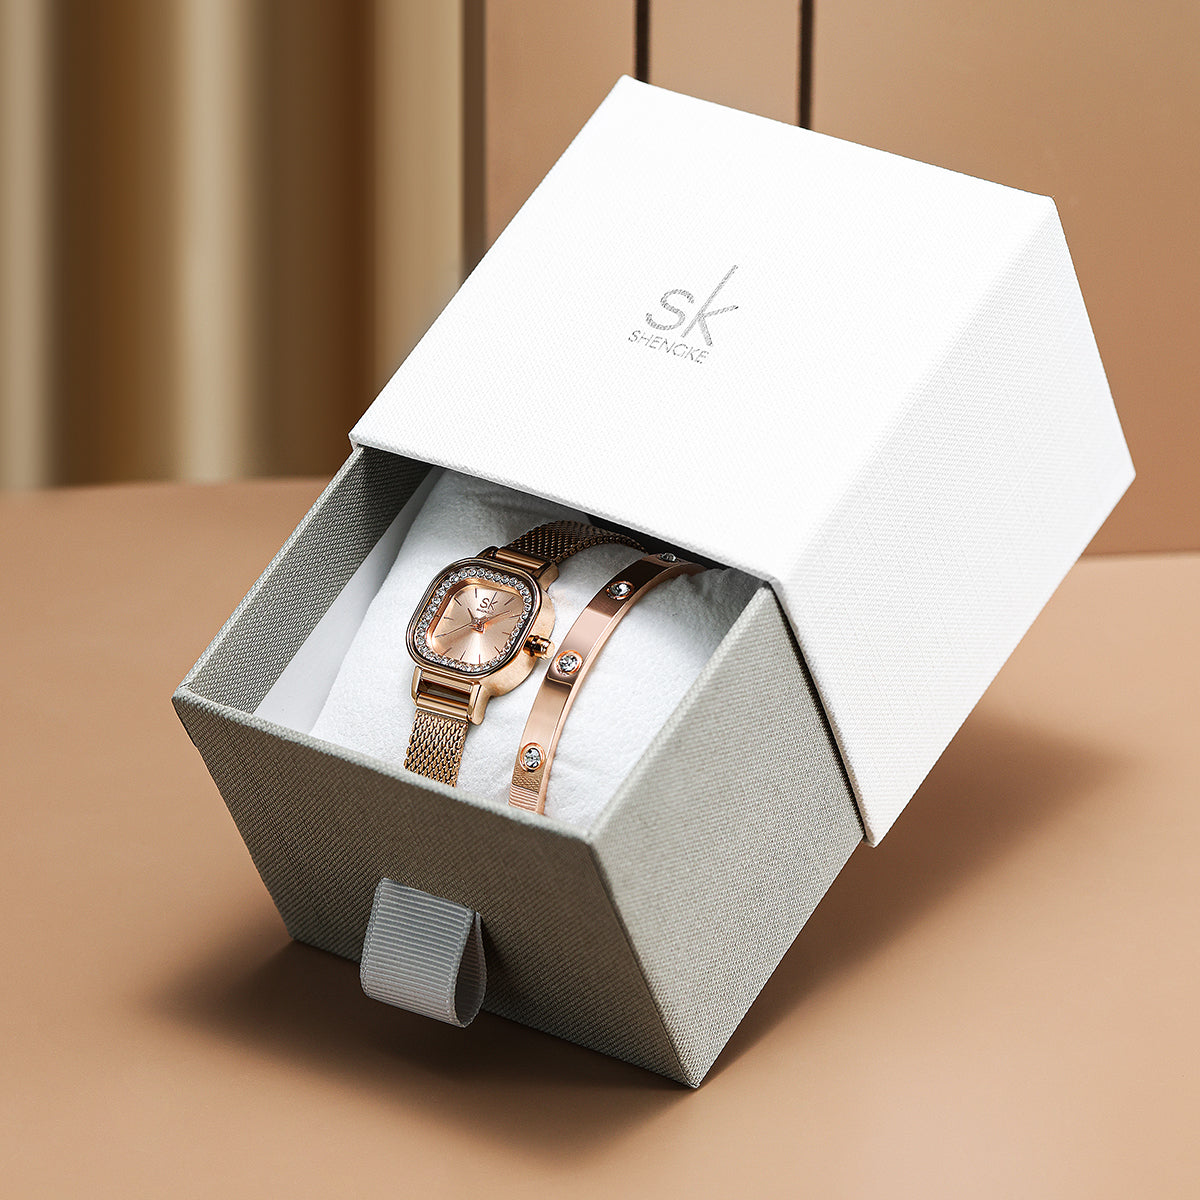 SK Watch and Bracelet